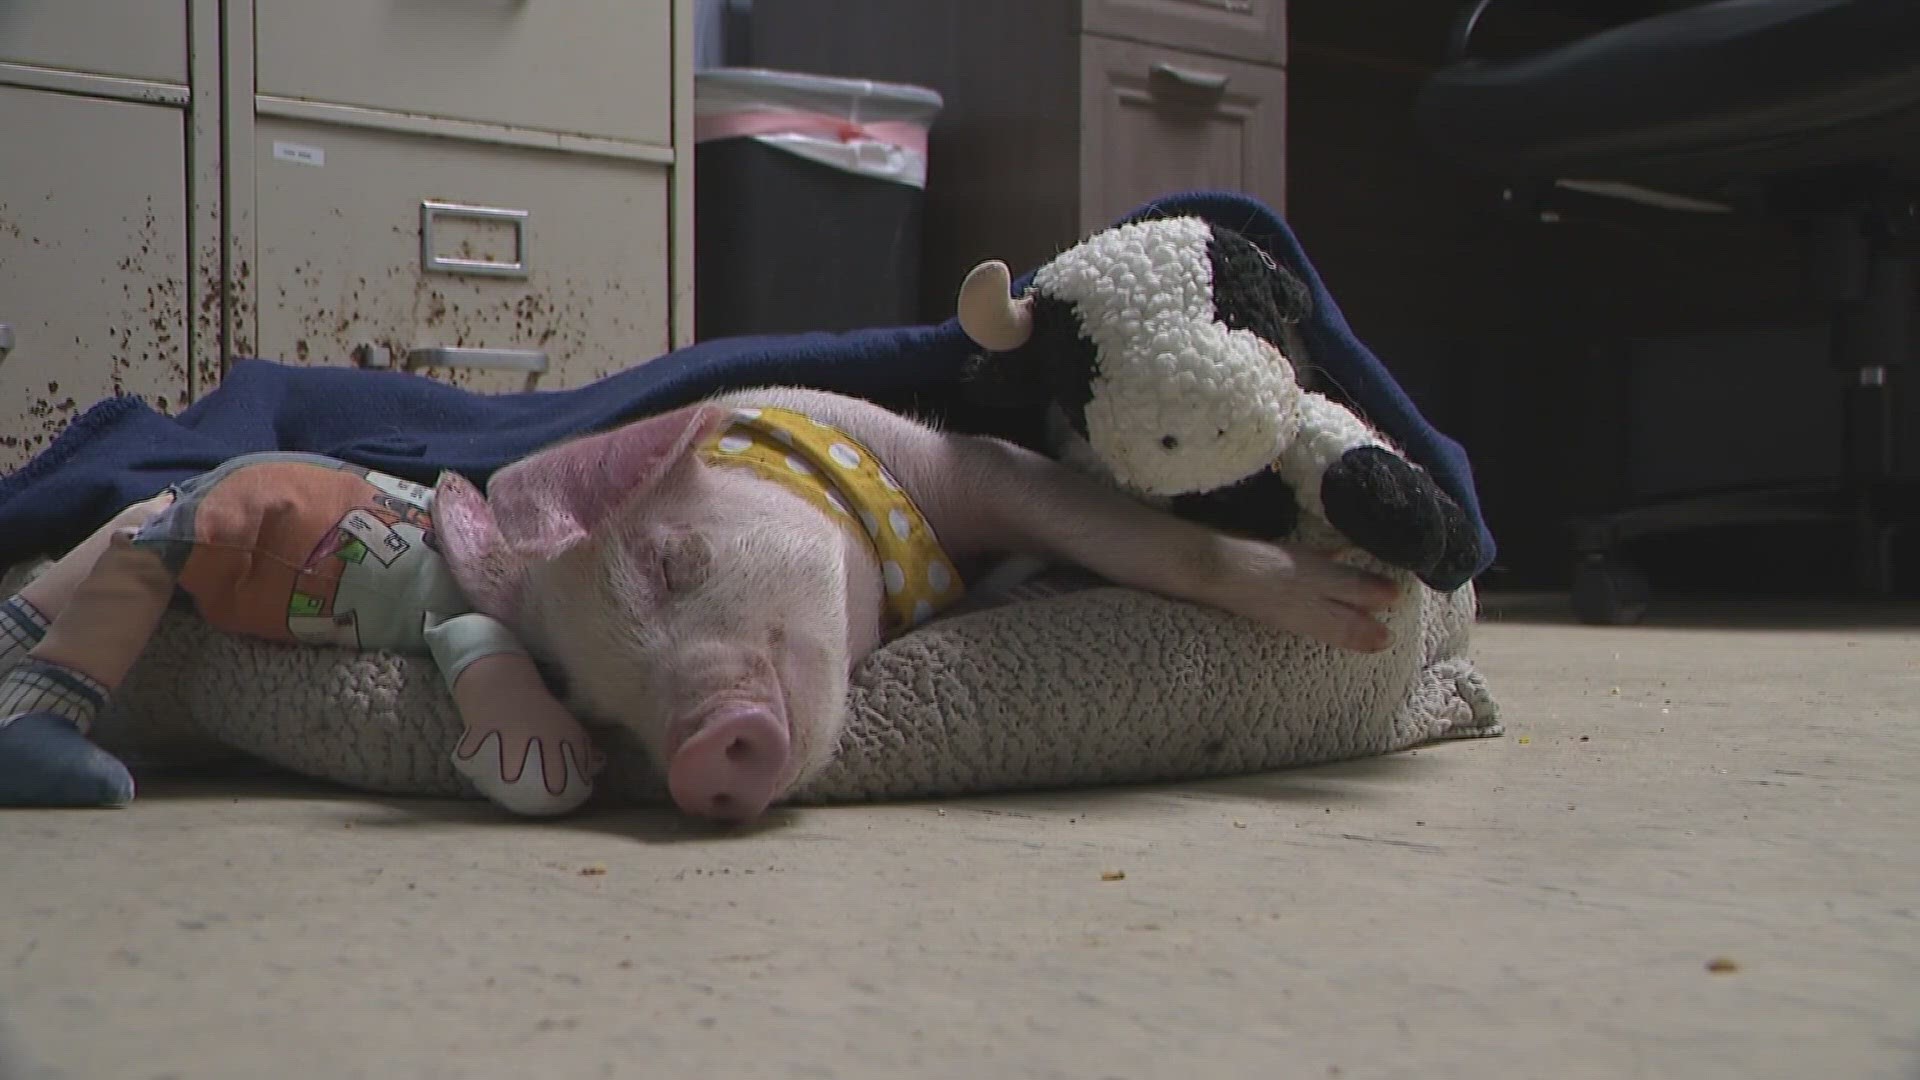 The truck was headed to a slaughterhouse in Ohio. Now, the pig is a spoiled pet named after a pork product.